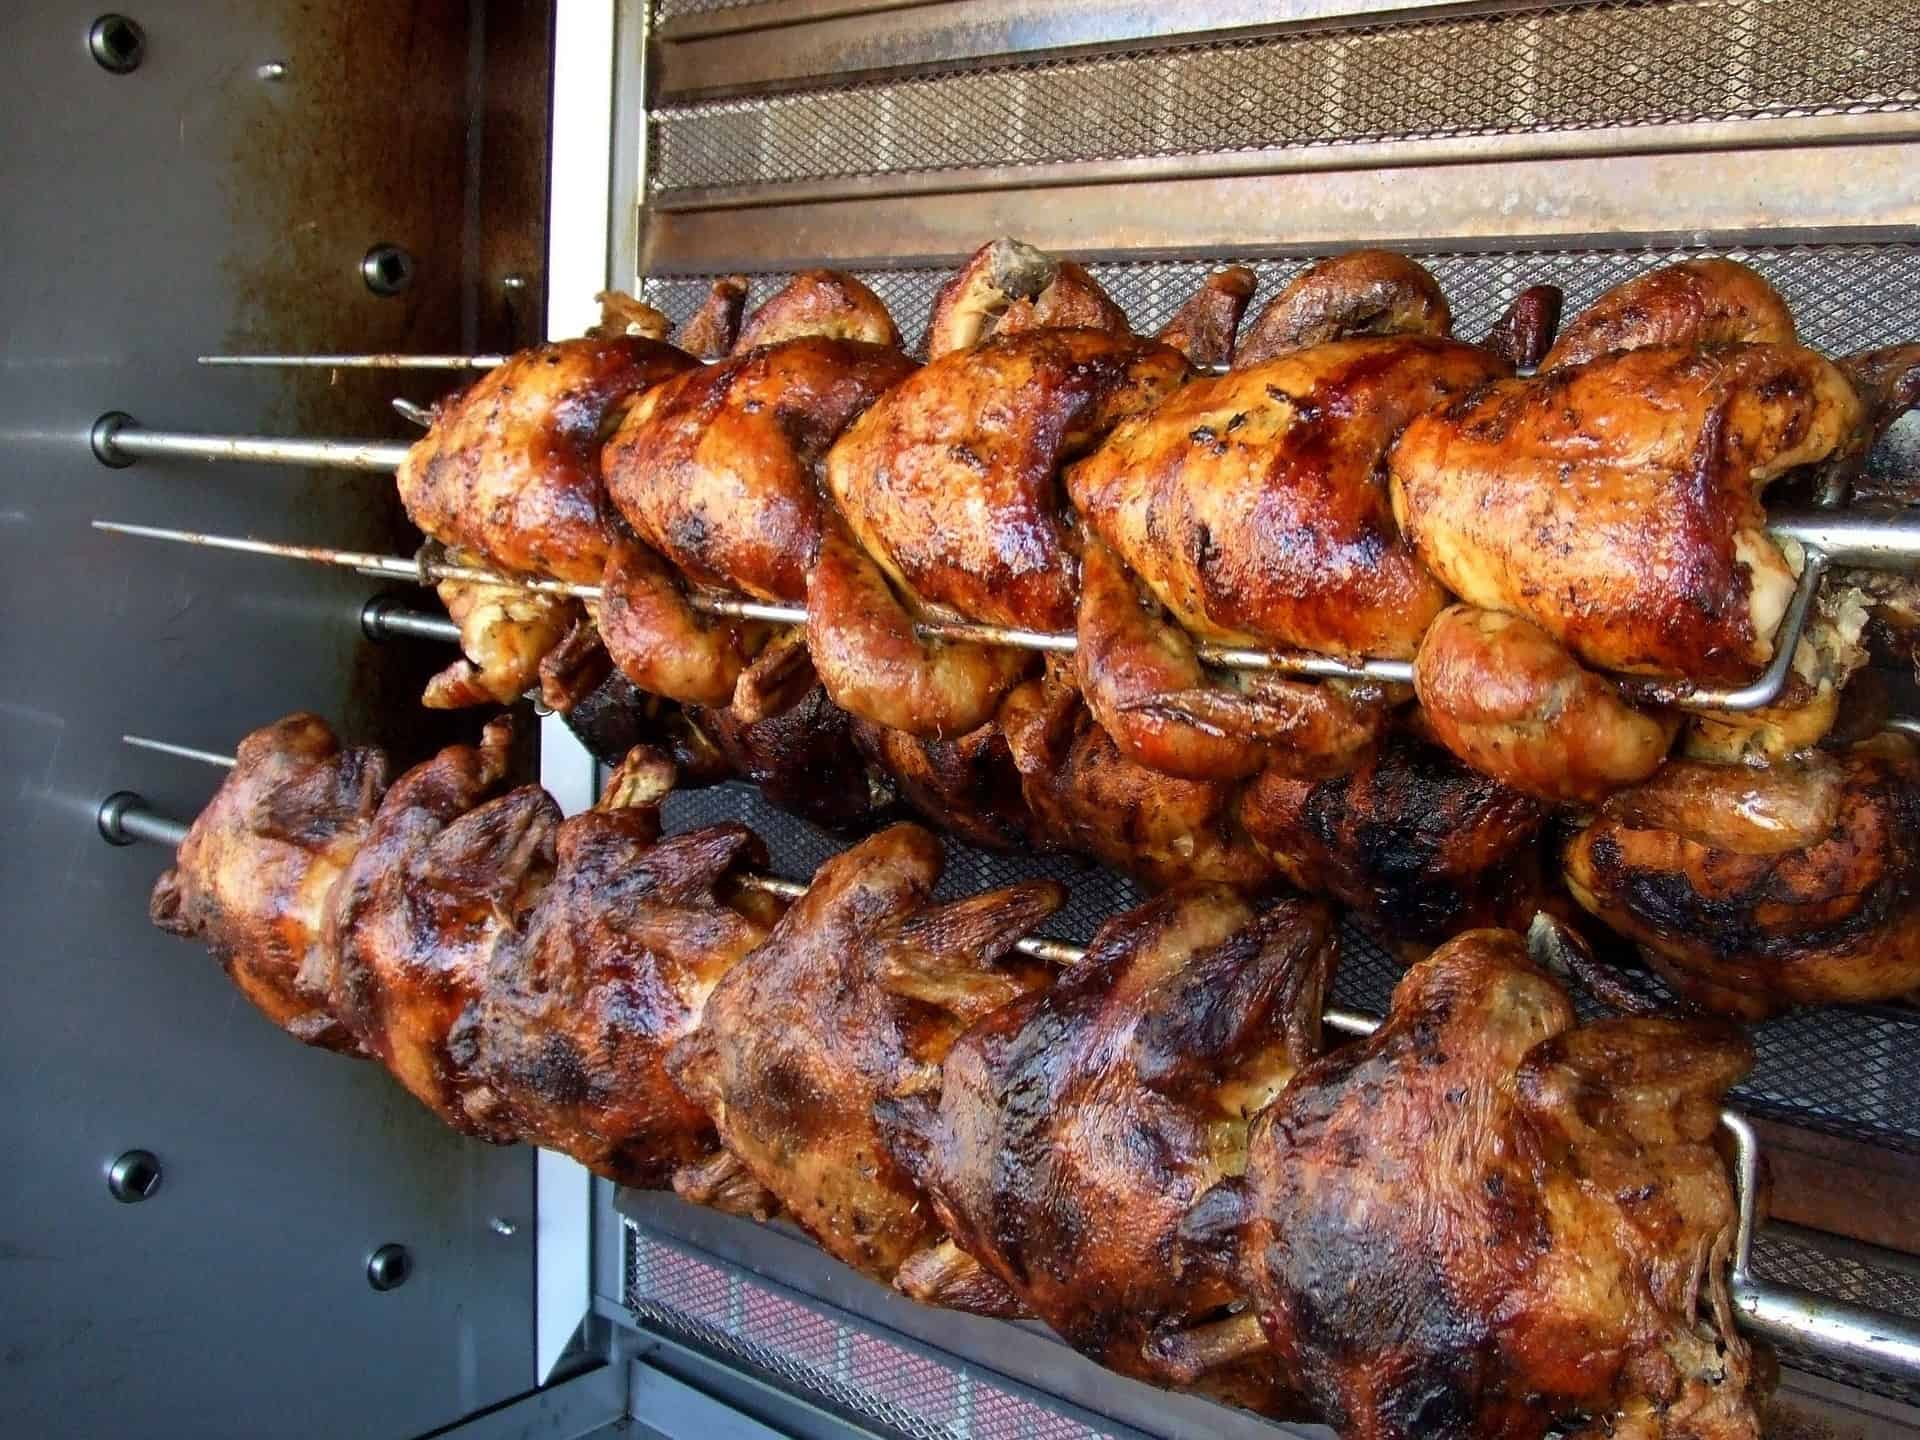 Is eating rotisserie chicken healthy? There are benefits ...